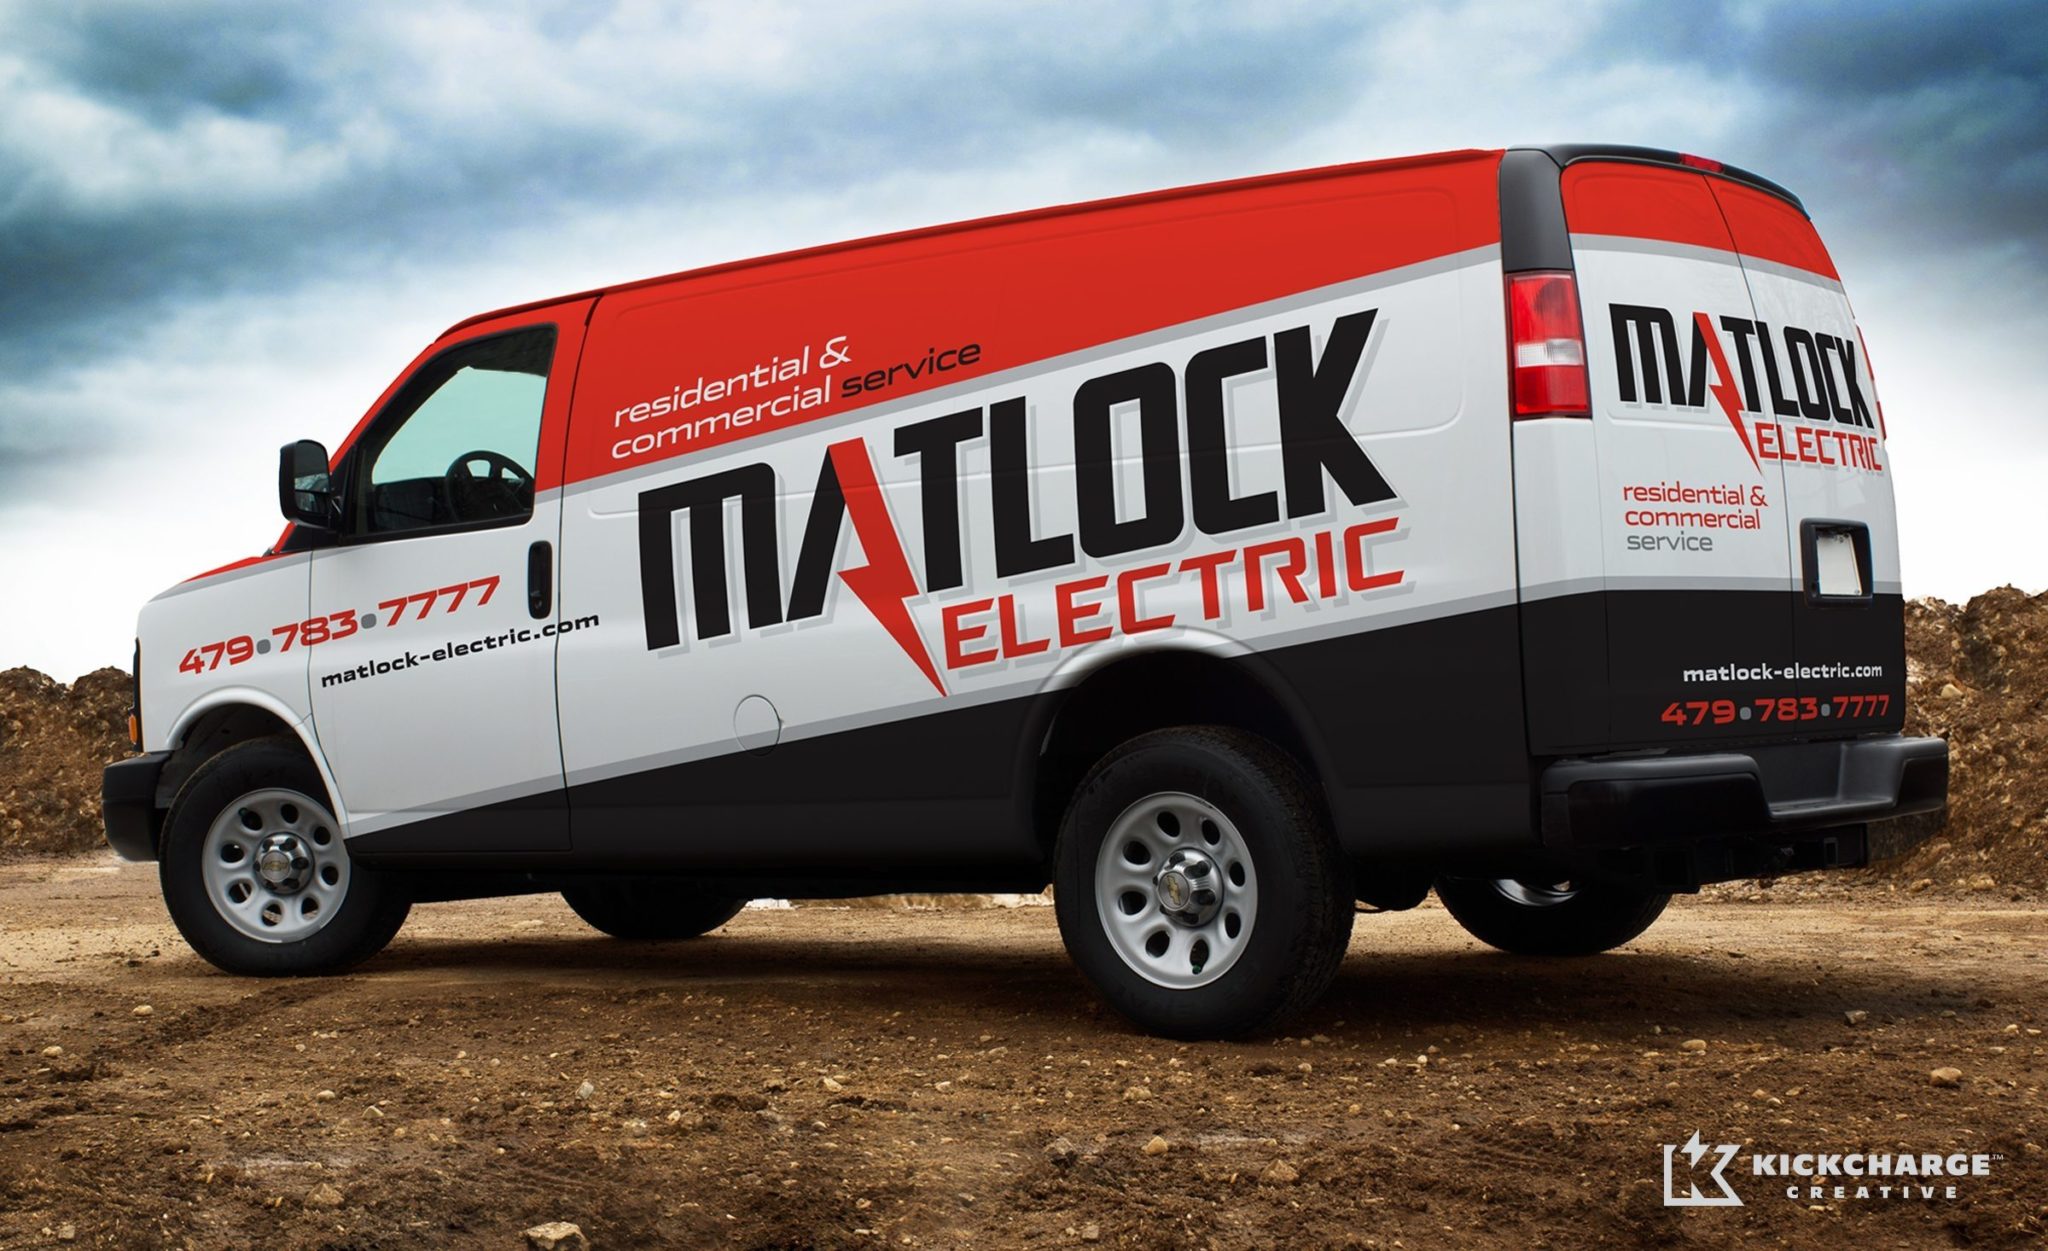 Truck wrap design for Matlock Electric.